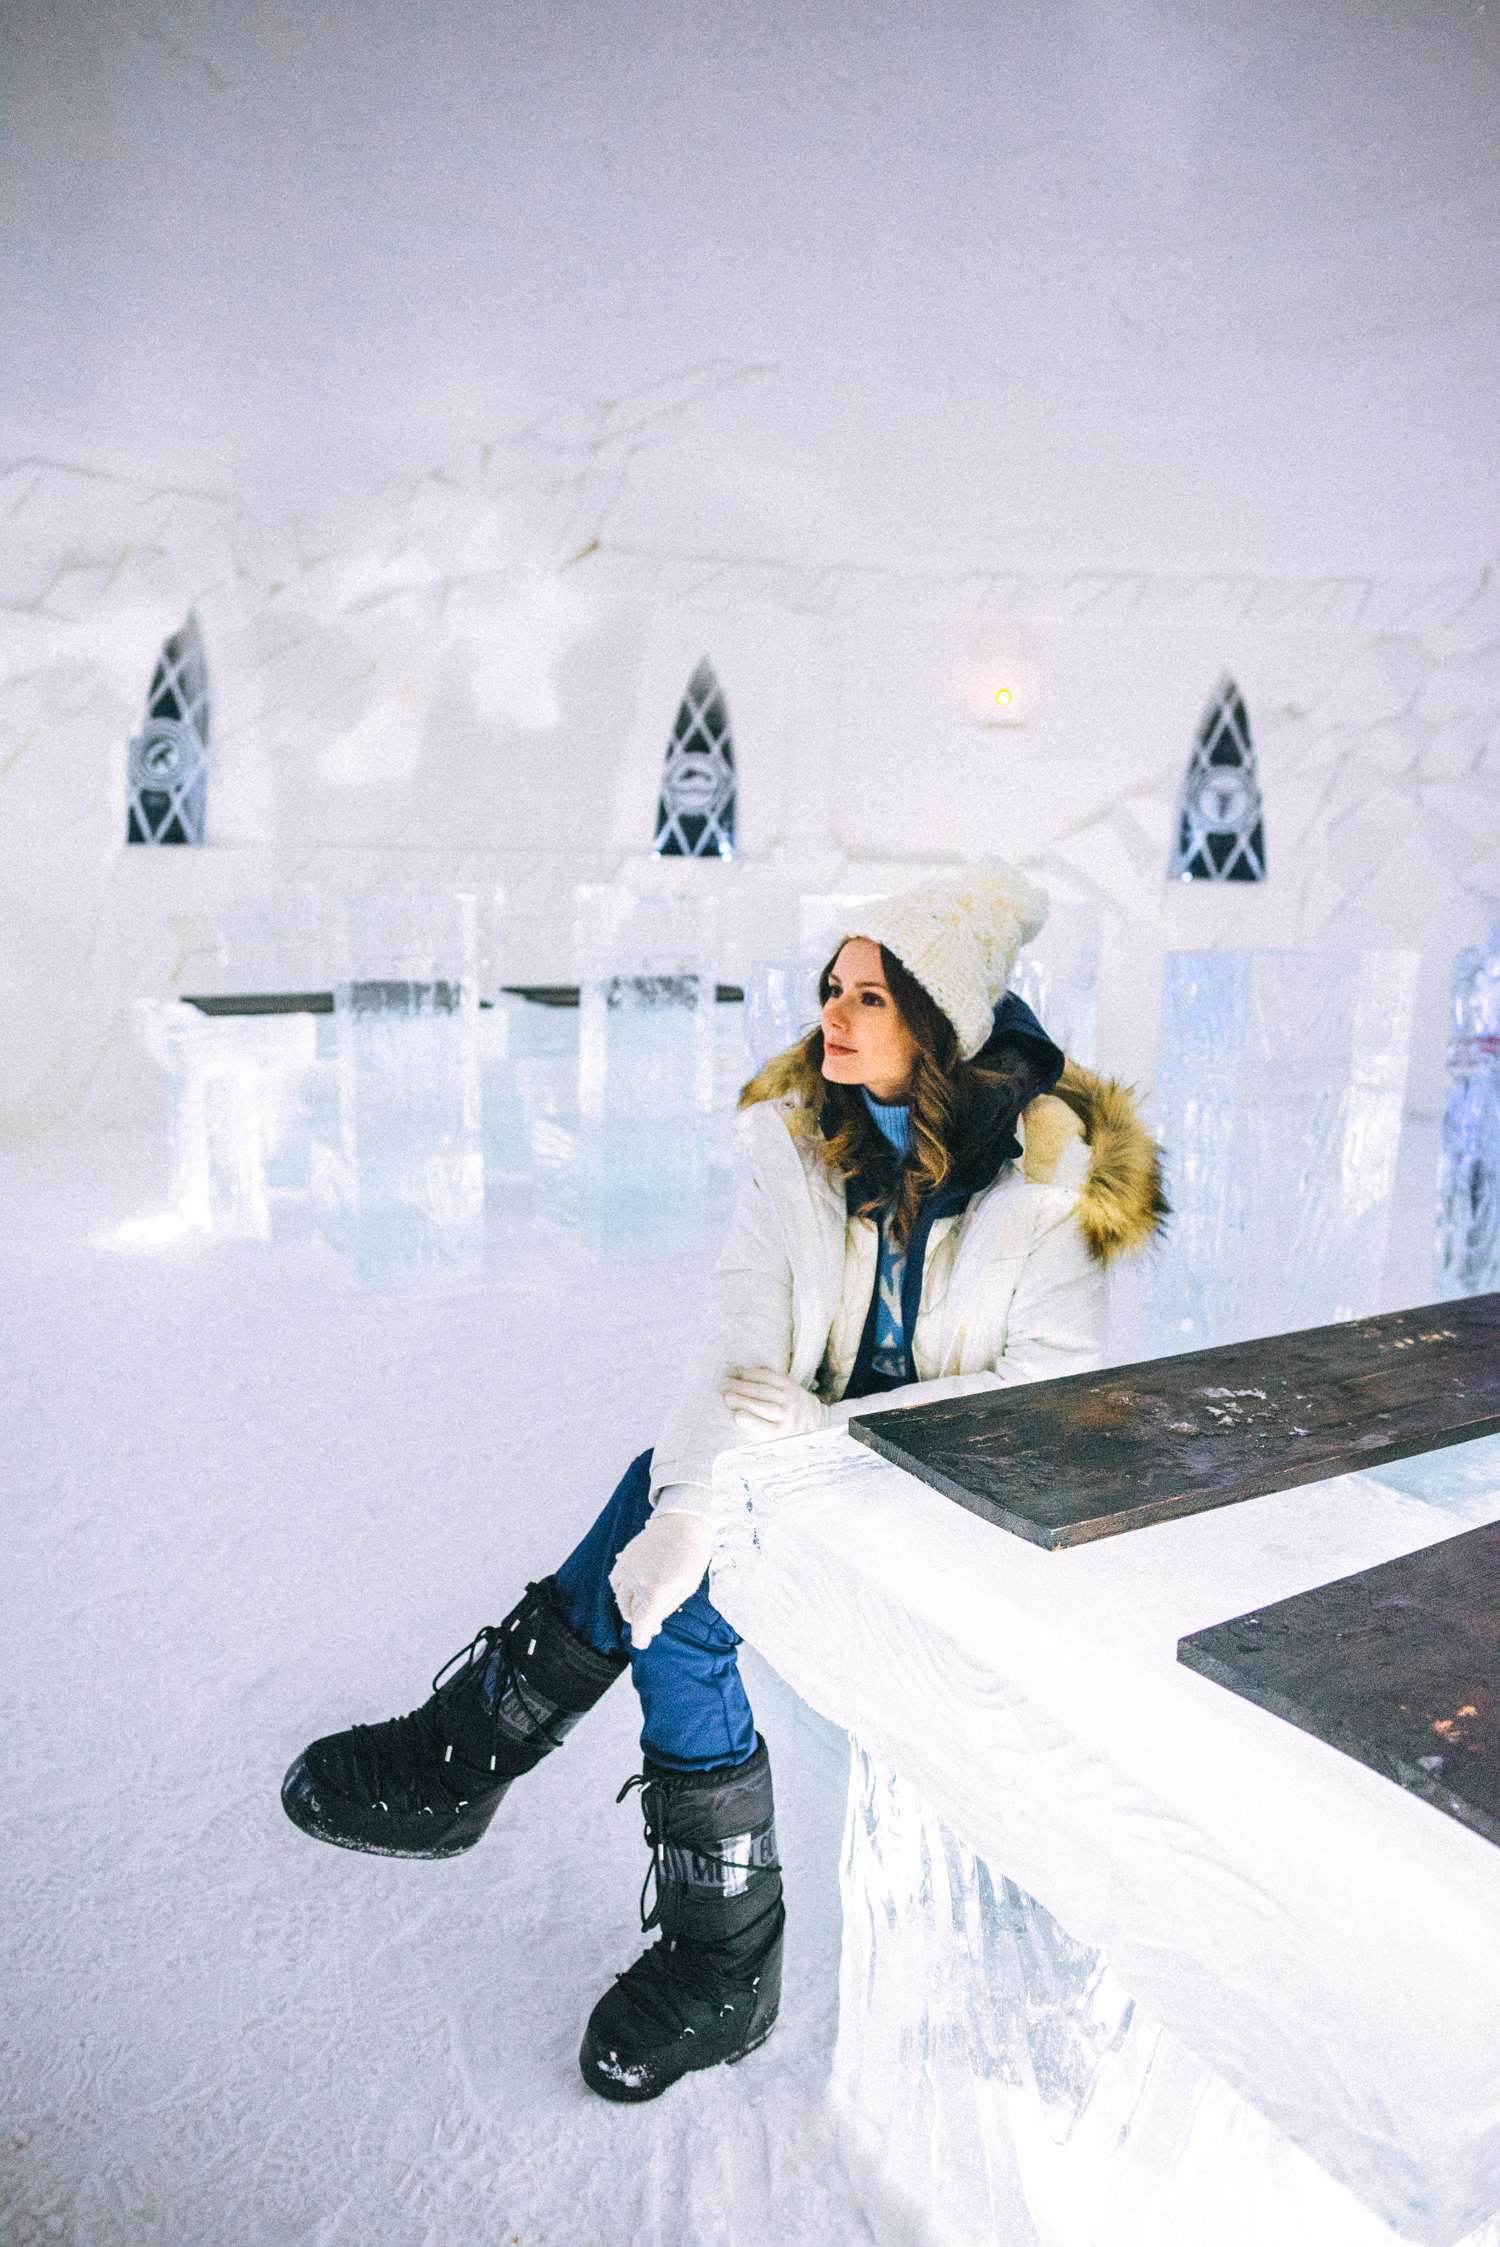 Alyssa Campanella of The A List blog visits the Game of Thrones ice hotel in Finland wearing Perfect Moment